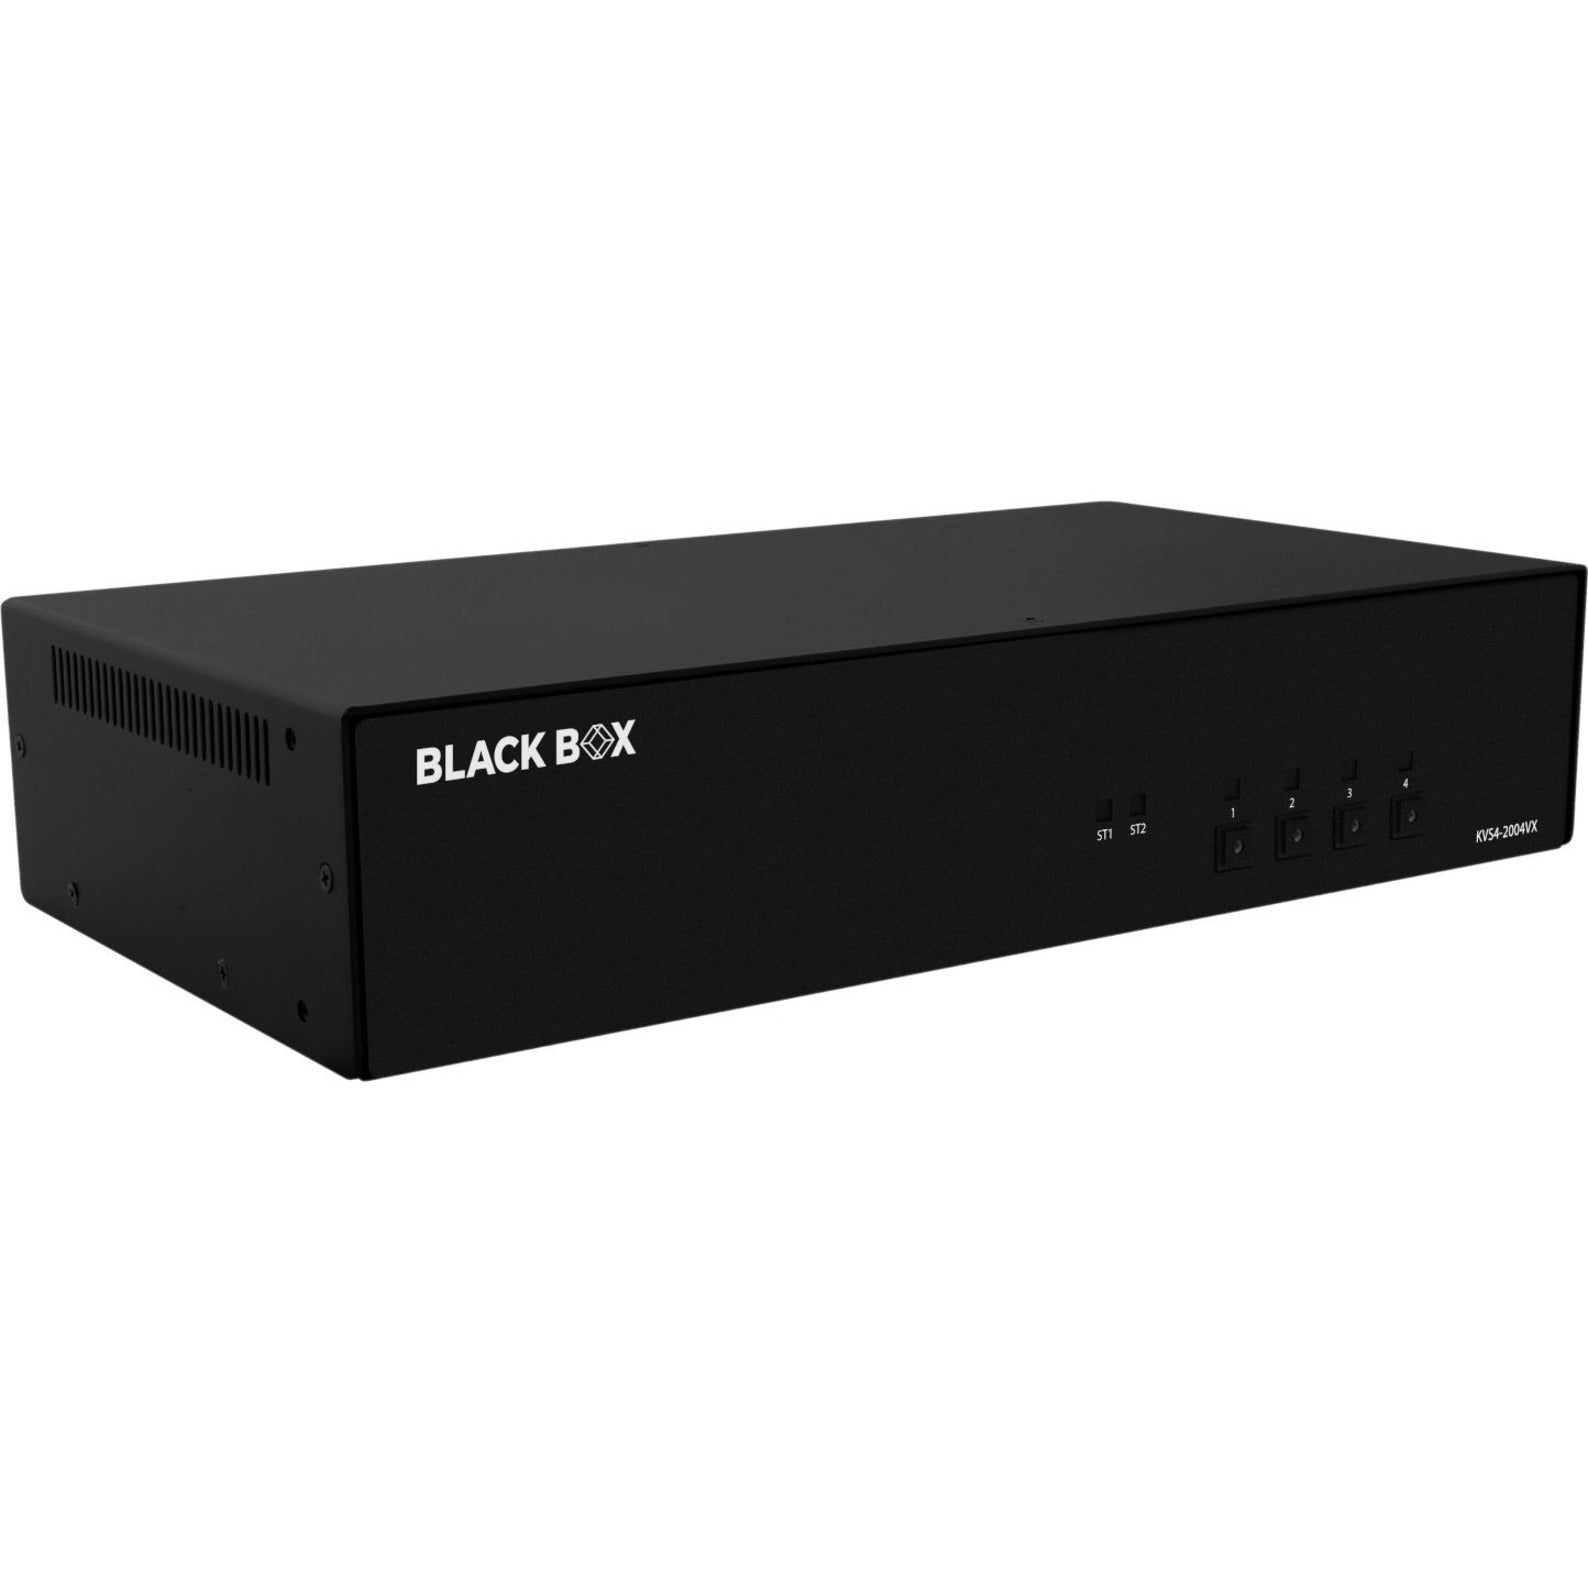 Black Box KVS4-2004VX Secure KVM Switch - DisplayPort, 4 Computers Supported, 2 Local Users, 3840 x 2160 Resolution